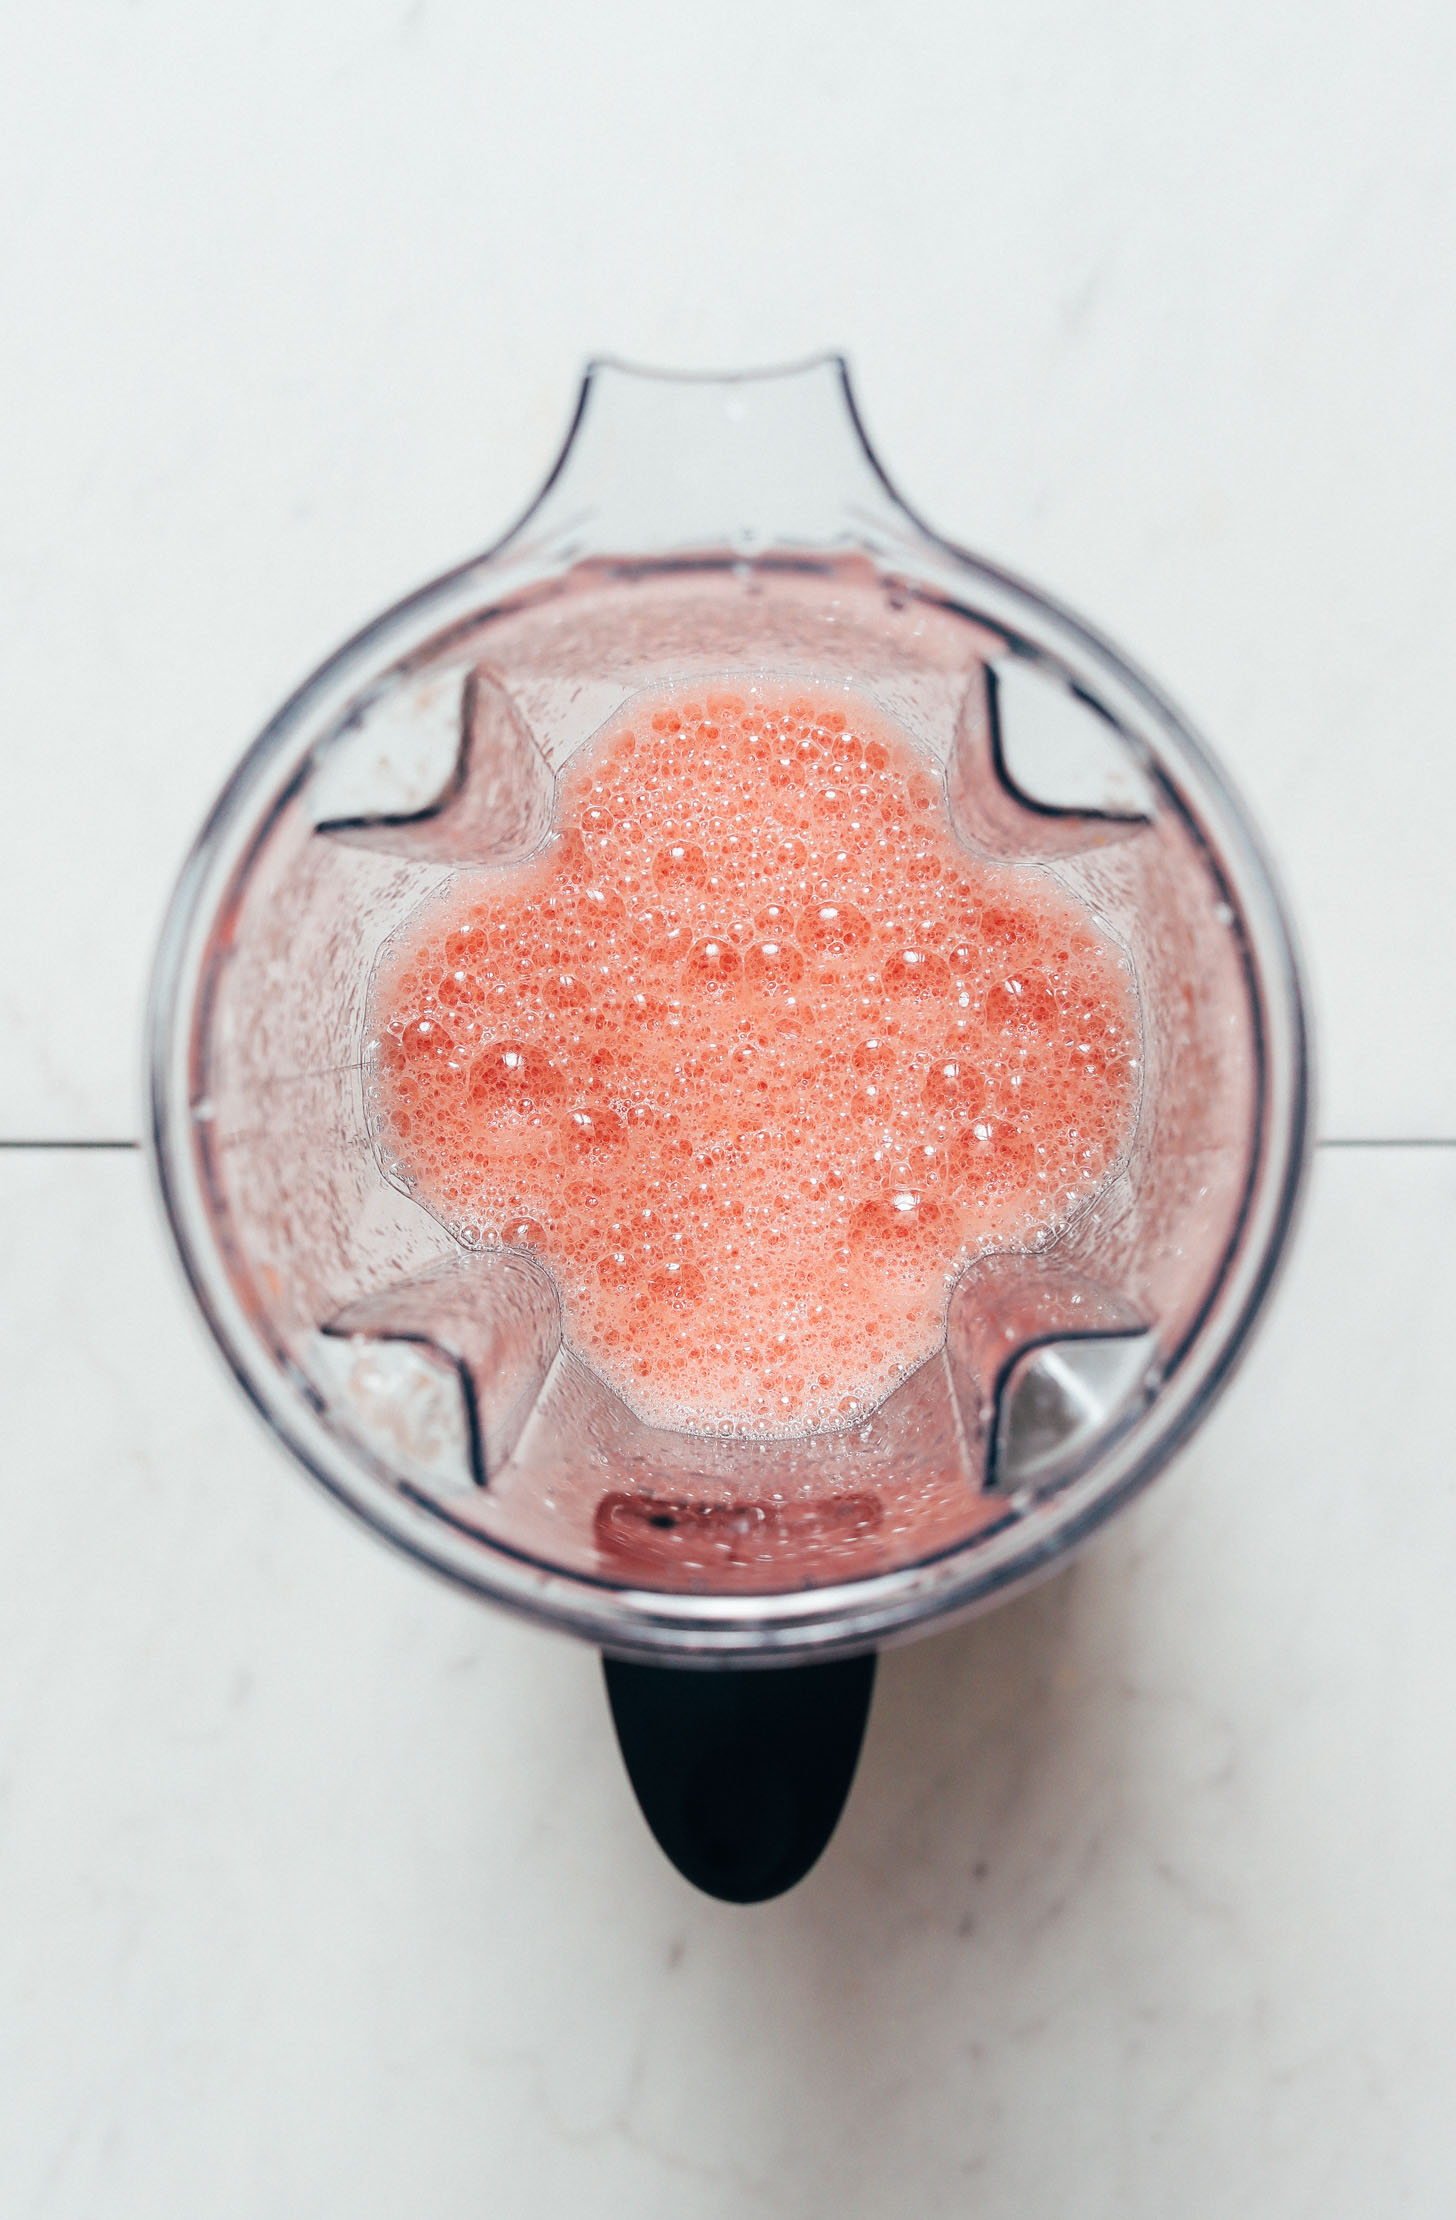 Blender of frothy watermelon juice